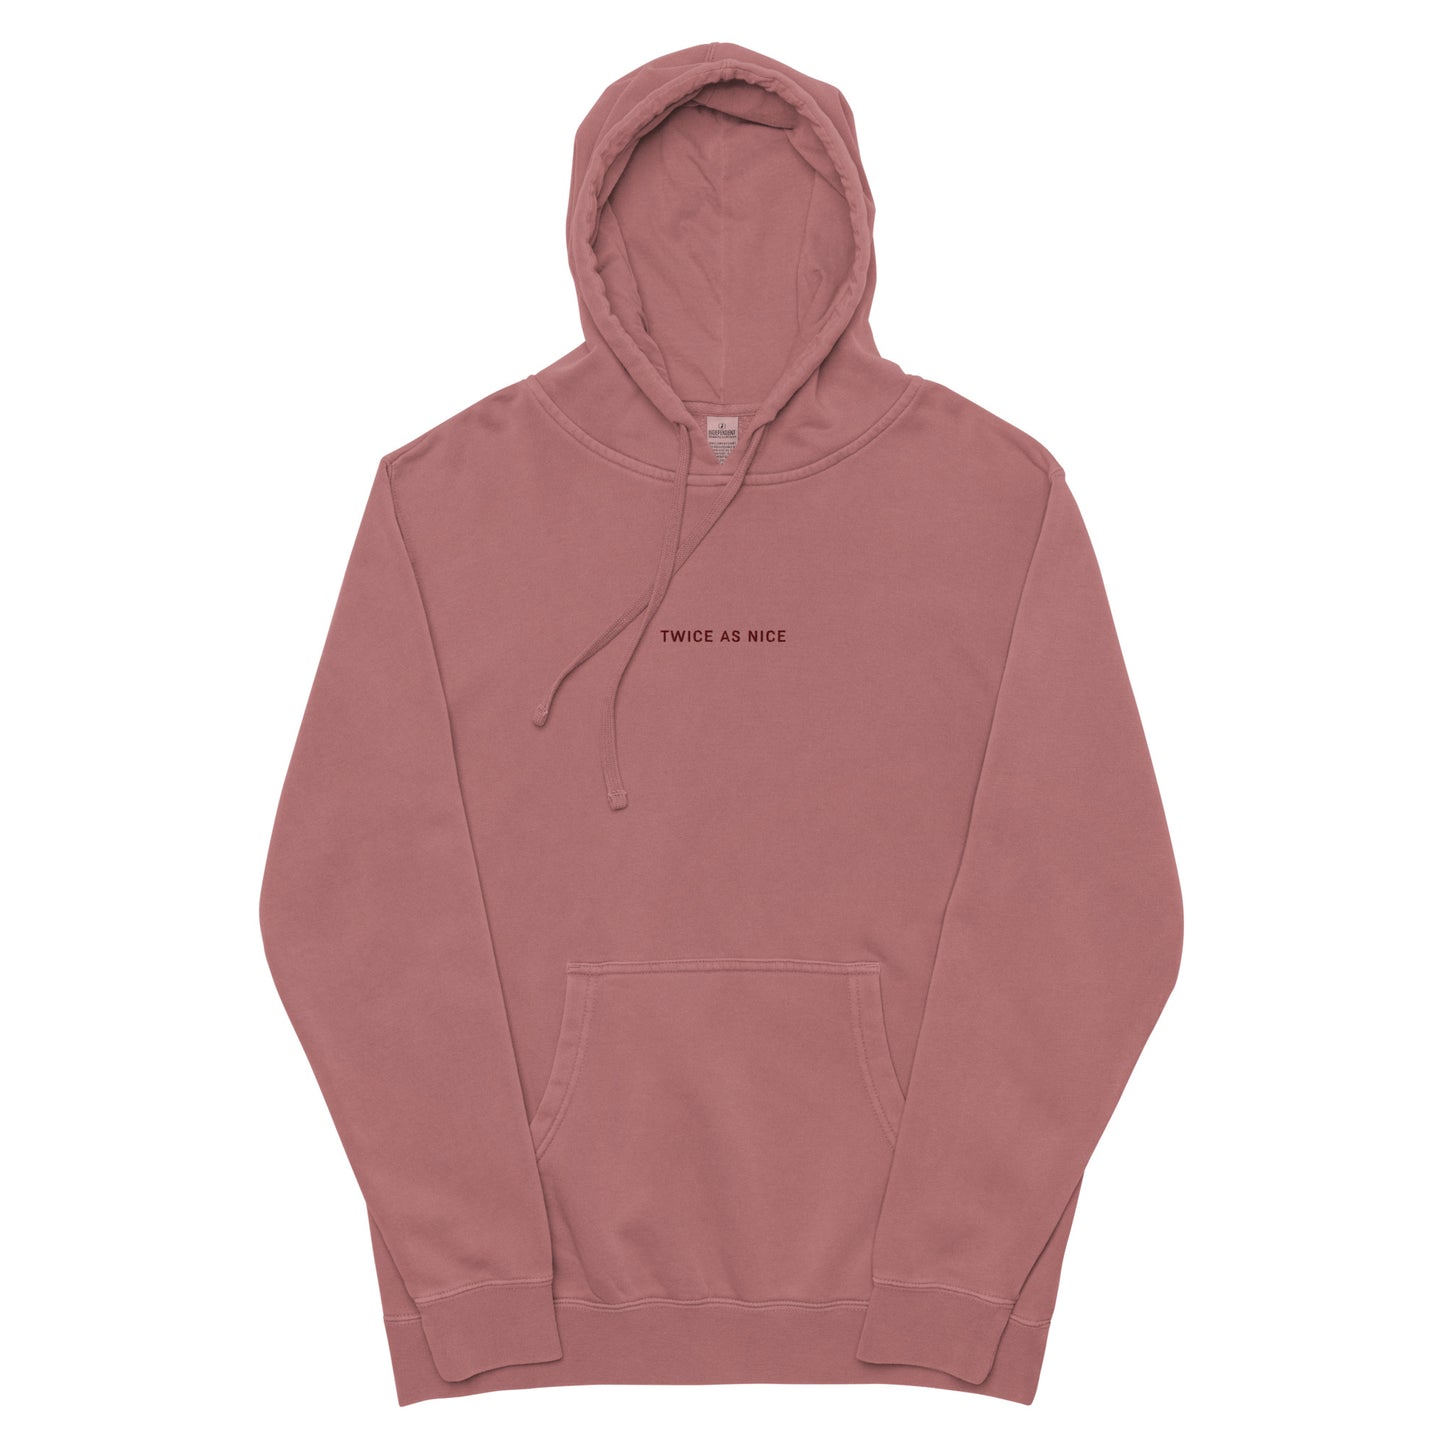 TWICE AS NICE pigment-dyed hoodie